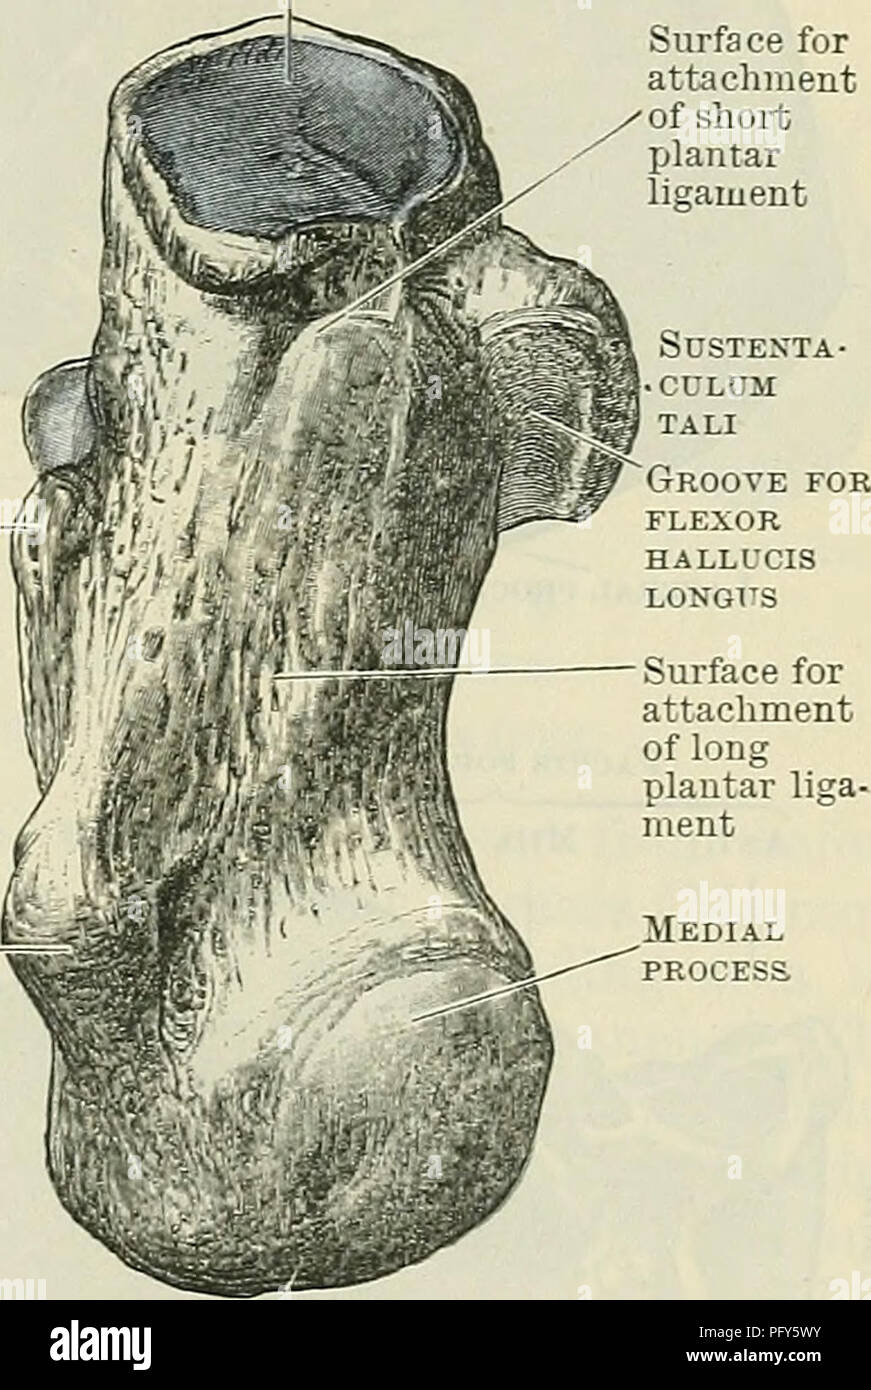 . Cunningham's Text-book of anatomy. Anatomy. Tuberosity A Fig. 259.—The Eight Calcaneus.. Tuberosity B A. Seen from above ; B. Seen from below. which a groove (sulcus calcanei) leads backwards and medially around the antero- medial border of the articular surface. When the calcaneus is placed in contact with the talus, this groove coincides with the sulcus on the plantar surface of the talus, and so forms a canal or tunnel (sinus tarsi) in which the strono- interosseous ligament which unites the two bones is lodged. To the front and medial side of this groove there is an elongated articular f Stock Photo